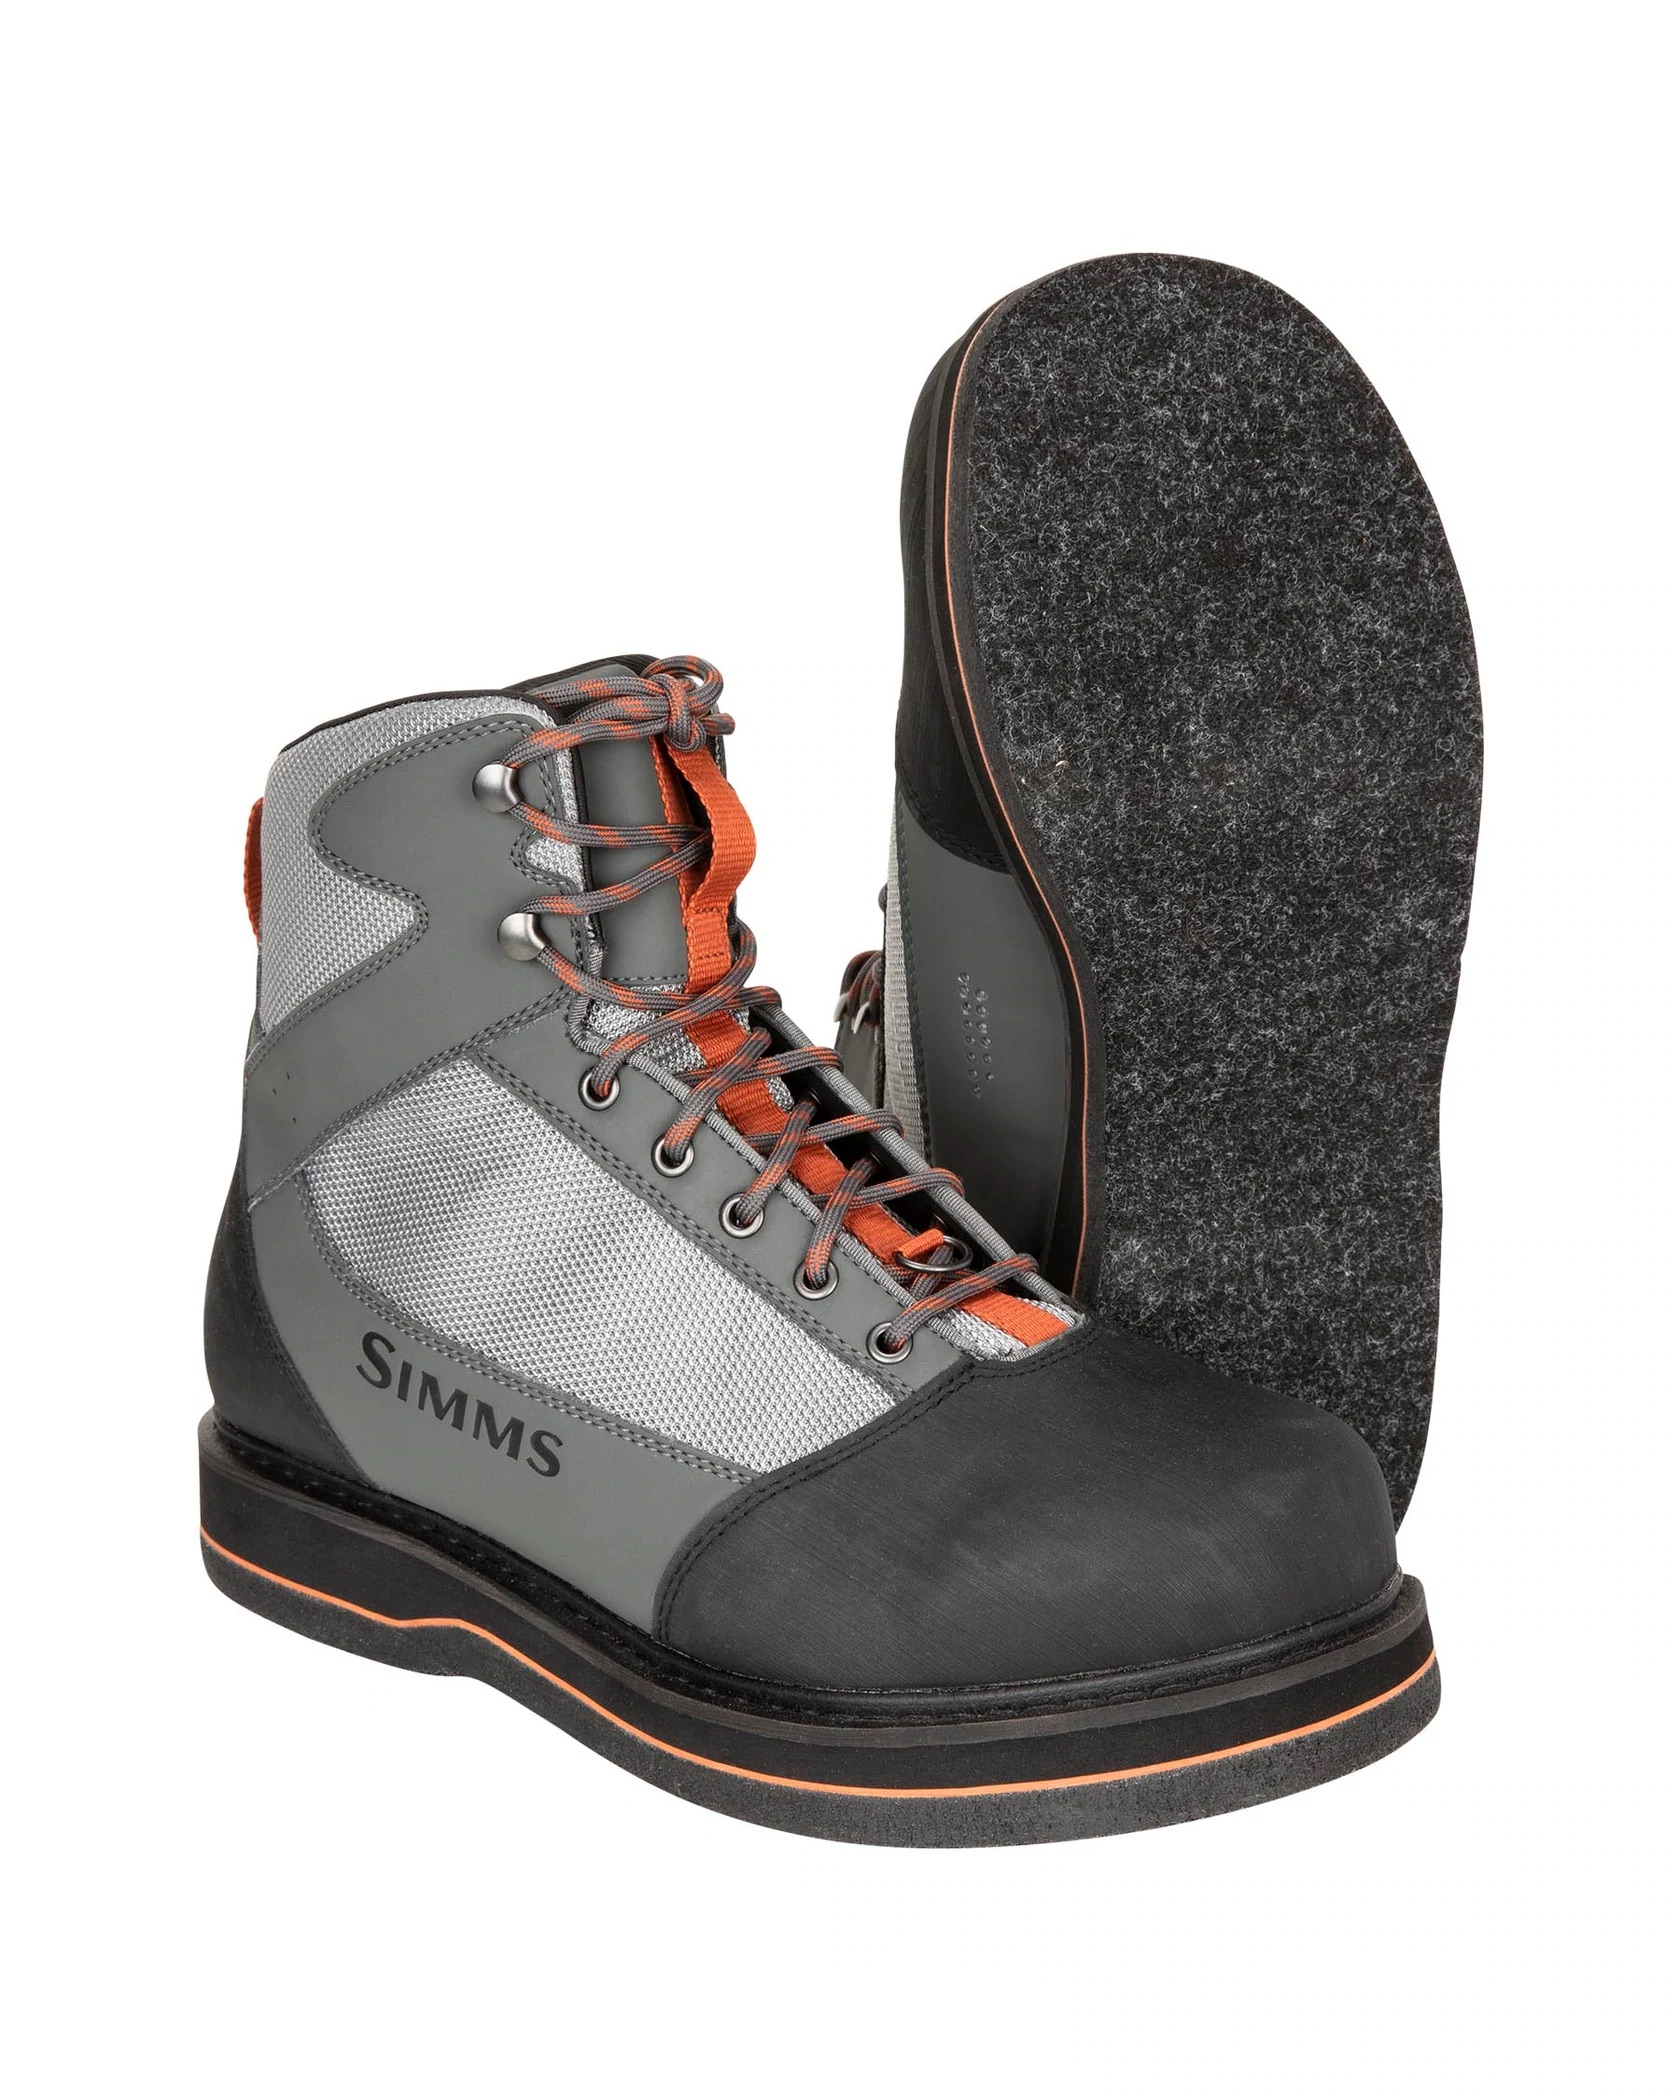 Simms Tributary Boot - Felt - Size 6